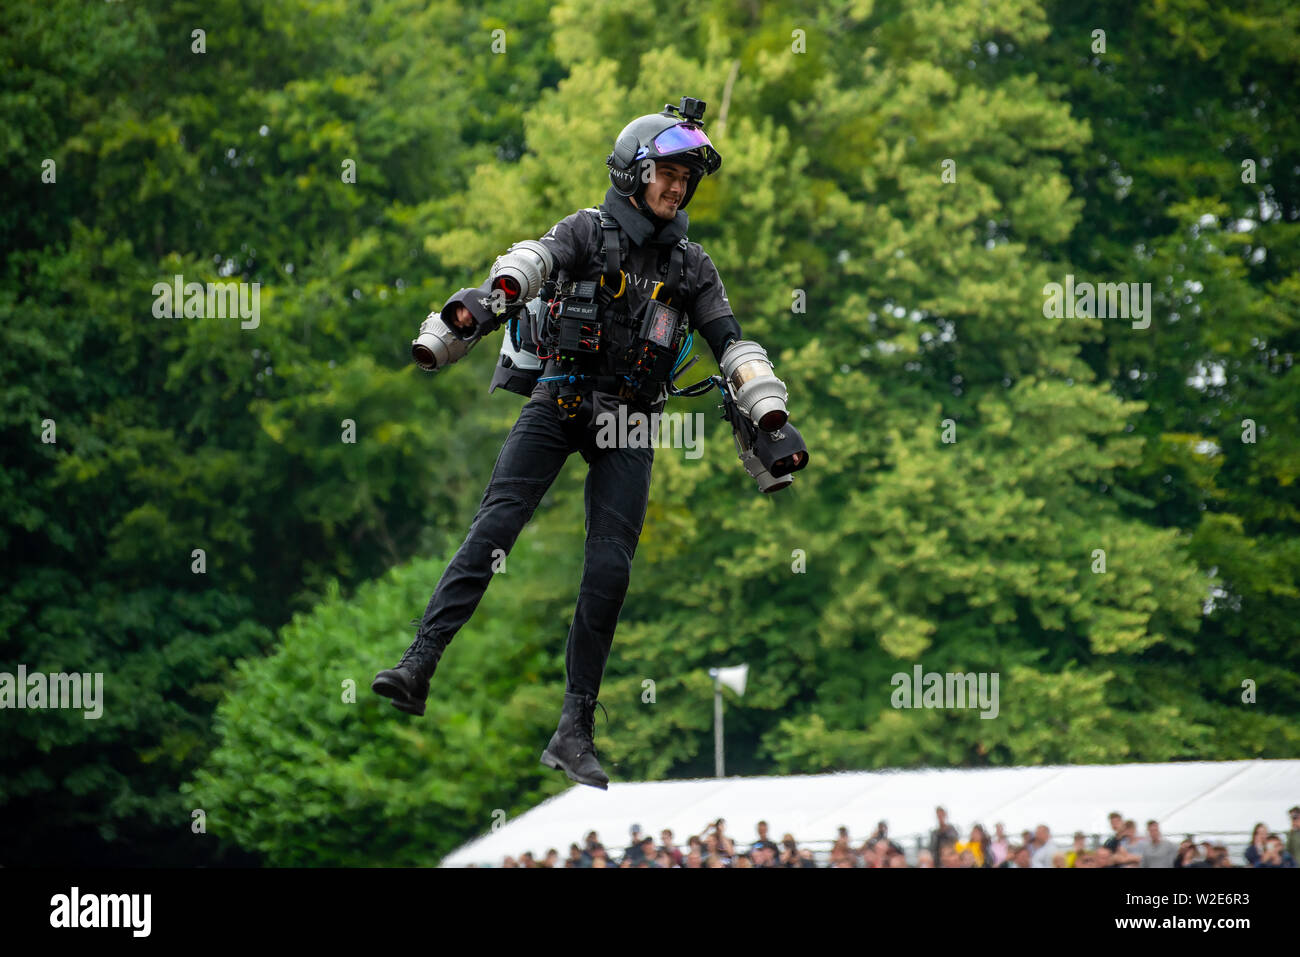 The Gravity Rocket Man Using a Jetpack at Goodwood Festival of Speed 2019, Chichester, West Sussex, England, UK Stock Photo